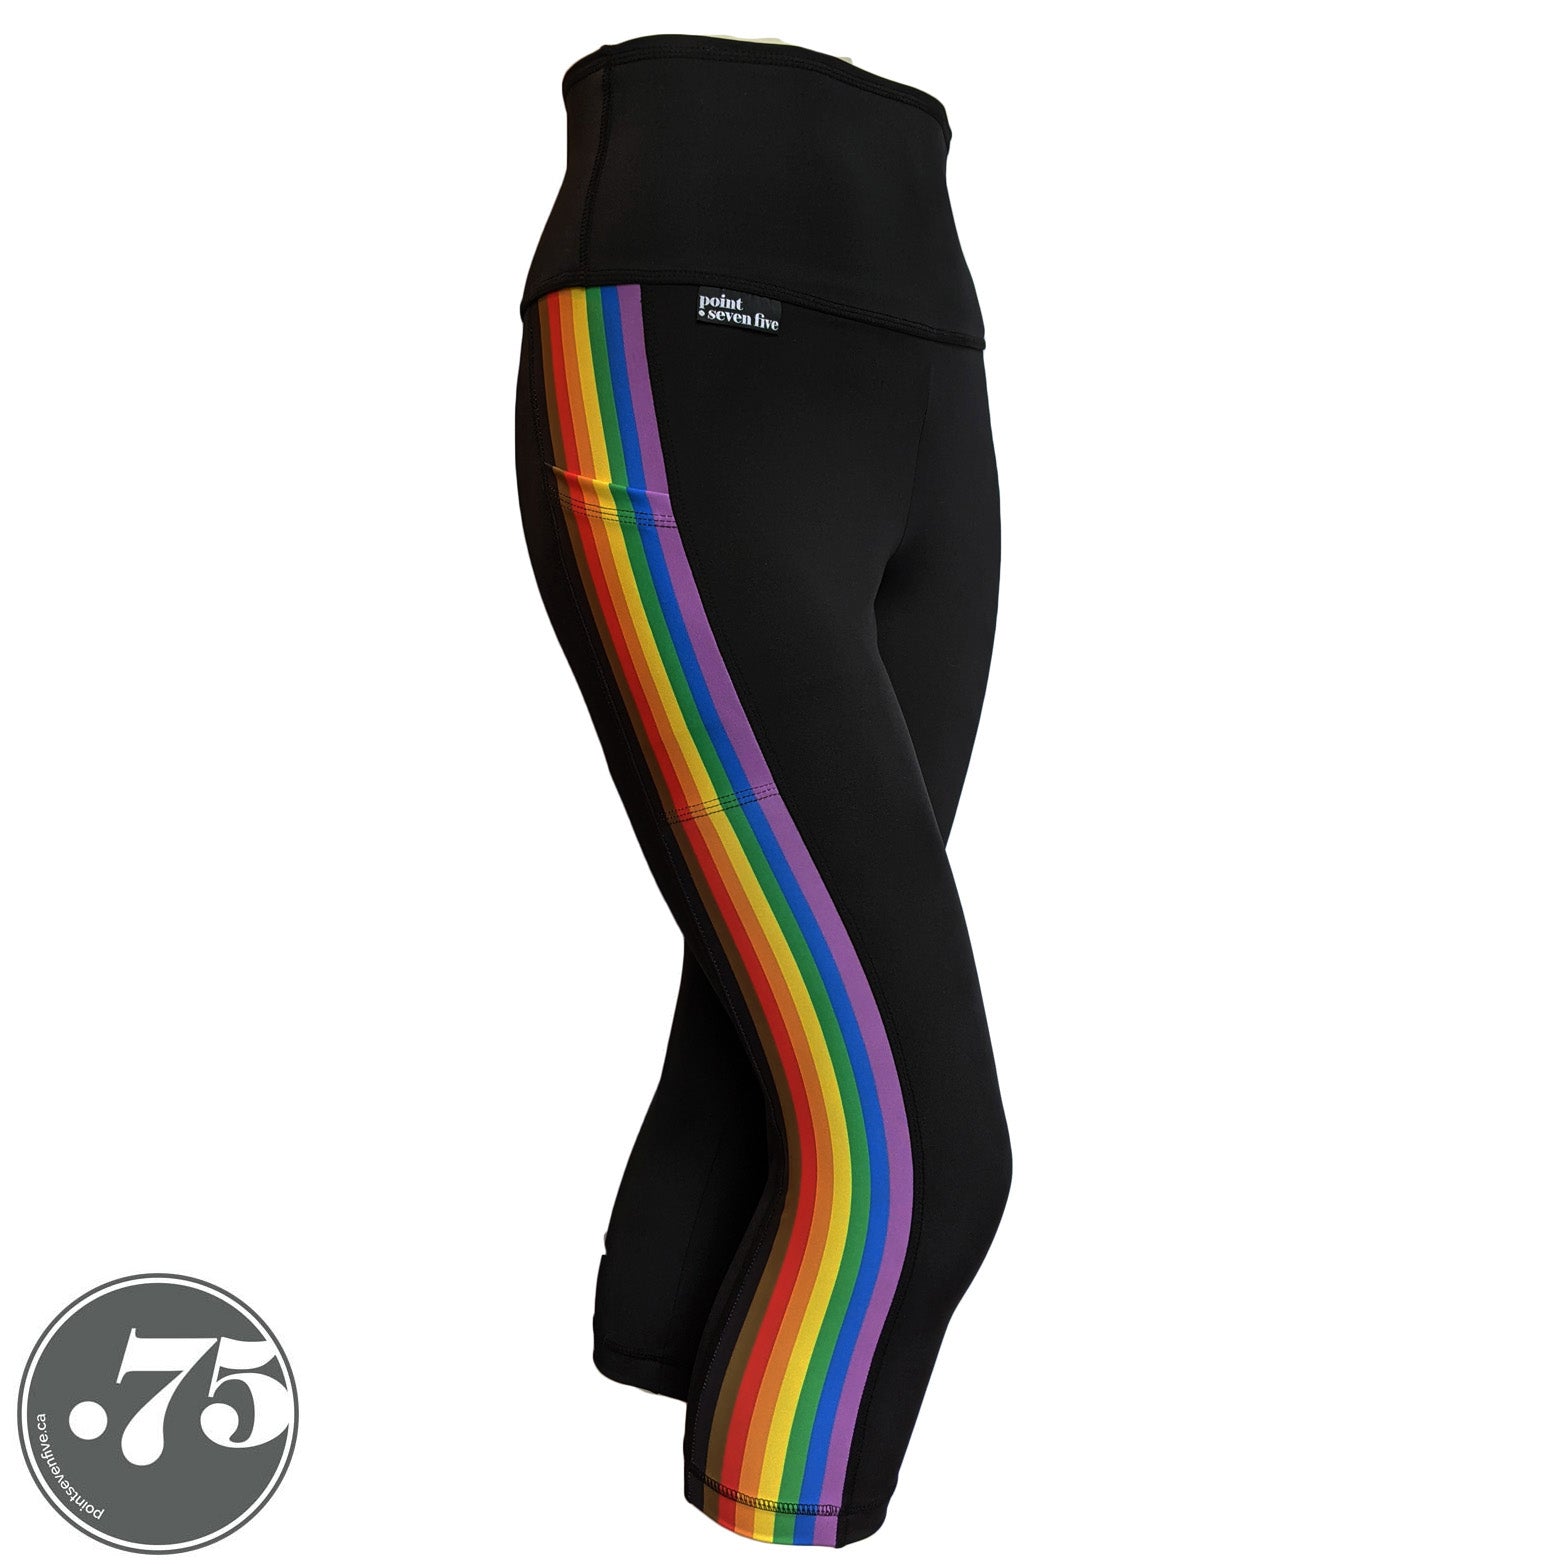 A pair of black spandex capri leggings on a mannequin, the leggings have a 3.5” wide stripe down the side that has a printed fabric with the stripes of the Philadelphia Pride Flag vertically, the stripes are black, brown, red, orange, yellow, green, blue & purple. 